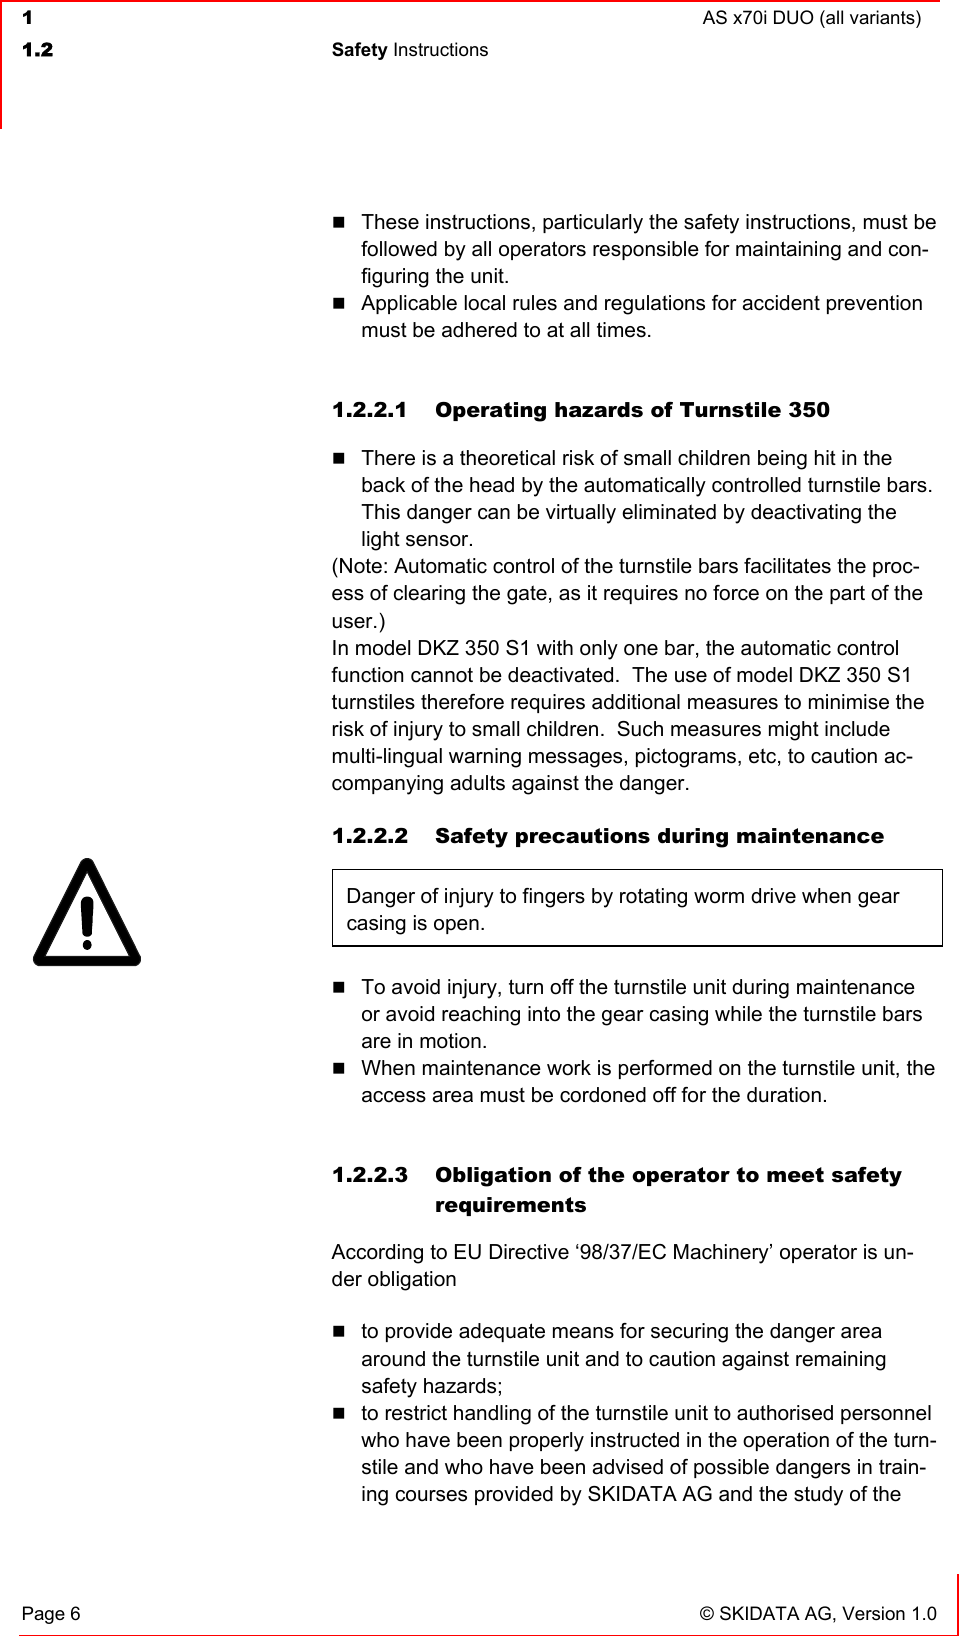  1  AS x70i DUO (all variants)  1.2 Safety Instructions   Page 6  © SKIDATA AG, Version 1.0  These instructions, particularly the safety instructions, must be followed by all operators responsible for maintaining and con-figuring the unit.  Applicable local rules and regulations for accident prevention must be adhered to at all times.  1.2.2.1  Operating hazards of Turnstile 350  There is a theoretical risk of small children being hit in the back of the head by the automatically controlled turnstile bars. This danger can be virtually eliminated by deactivating the light sensor. (Note: Automatic control of the turnstile bars facilitates the proc-ess of clearing the gate, as it requires no force on the part of the user.) In model DKZ 350 S1 with only one bar, the automatic control function cannot be deactivated.  The use of model DKZ 350 S1 turnstiles therefore requires additional measures to minimise the risk of injury to small children.  Such measures might include multi-lingual warning messages, pictograms, etc, to caution ac-companying adults against the danger. 1.2.2.2  Safety precautions during maintenance Danger of injury to fingers by rotating worm drive when gear casing is open.    To avoid injury, turn off the turnstile unit during maintenance or avoid reaching into the gear casing while the turnstile bars are in motion.  When maintenance work is performed on the turnstile unit, the access area must be cordoned off for the duration.  1.2.2.3  Obligation of the operator to meet safety requirements According to EU Directive ‘98/37/EC Machinery’ operator is un-der obligation  to provide adequate means for securing the danger area around the turnstile unit and to caution against remaining safety hazards;  to restrict handling of the turnstile unit to authorised personnel who have been properly instructed in the operation of the turn-stile and who have been advised of possible dangers in train-ing courses provided by SKIDATA AG and the study of the 